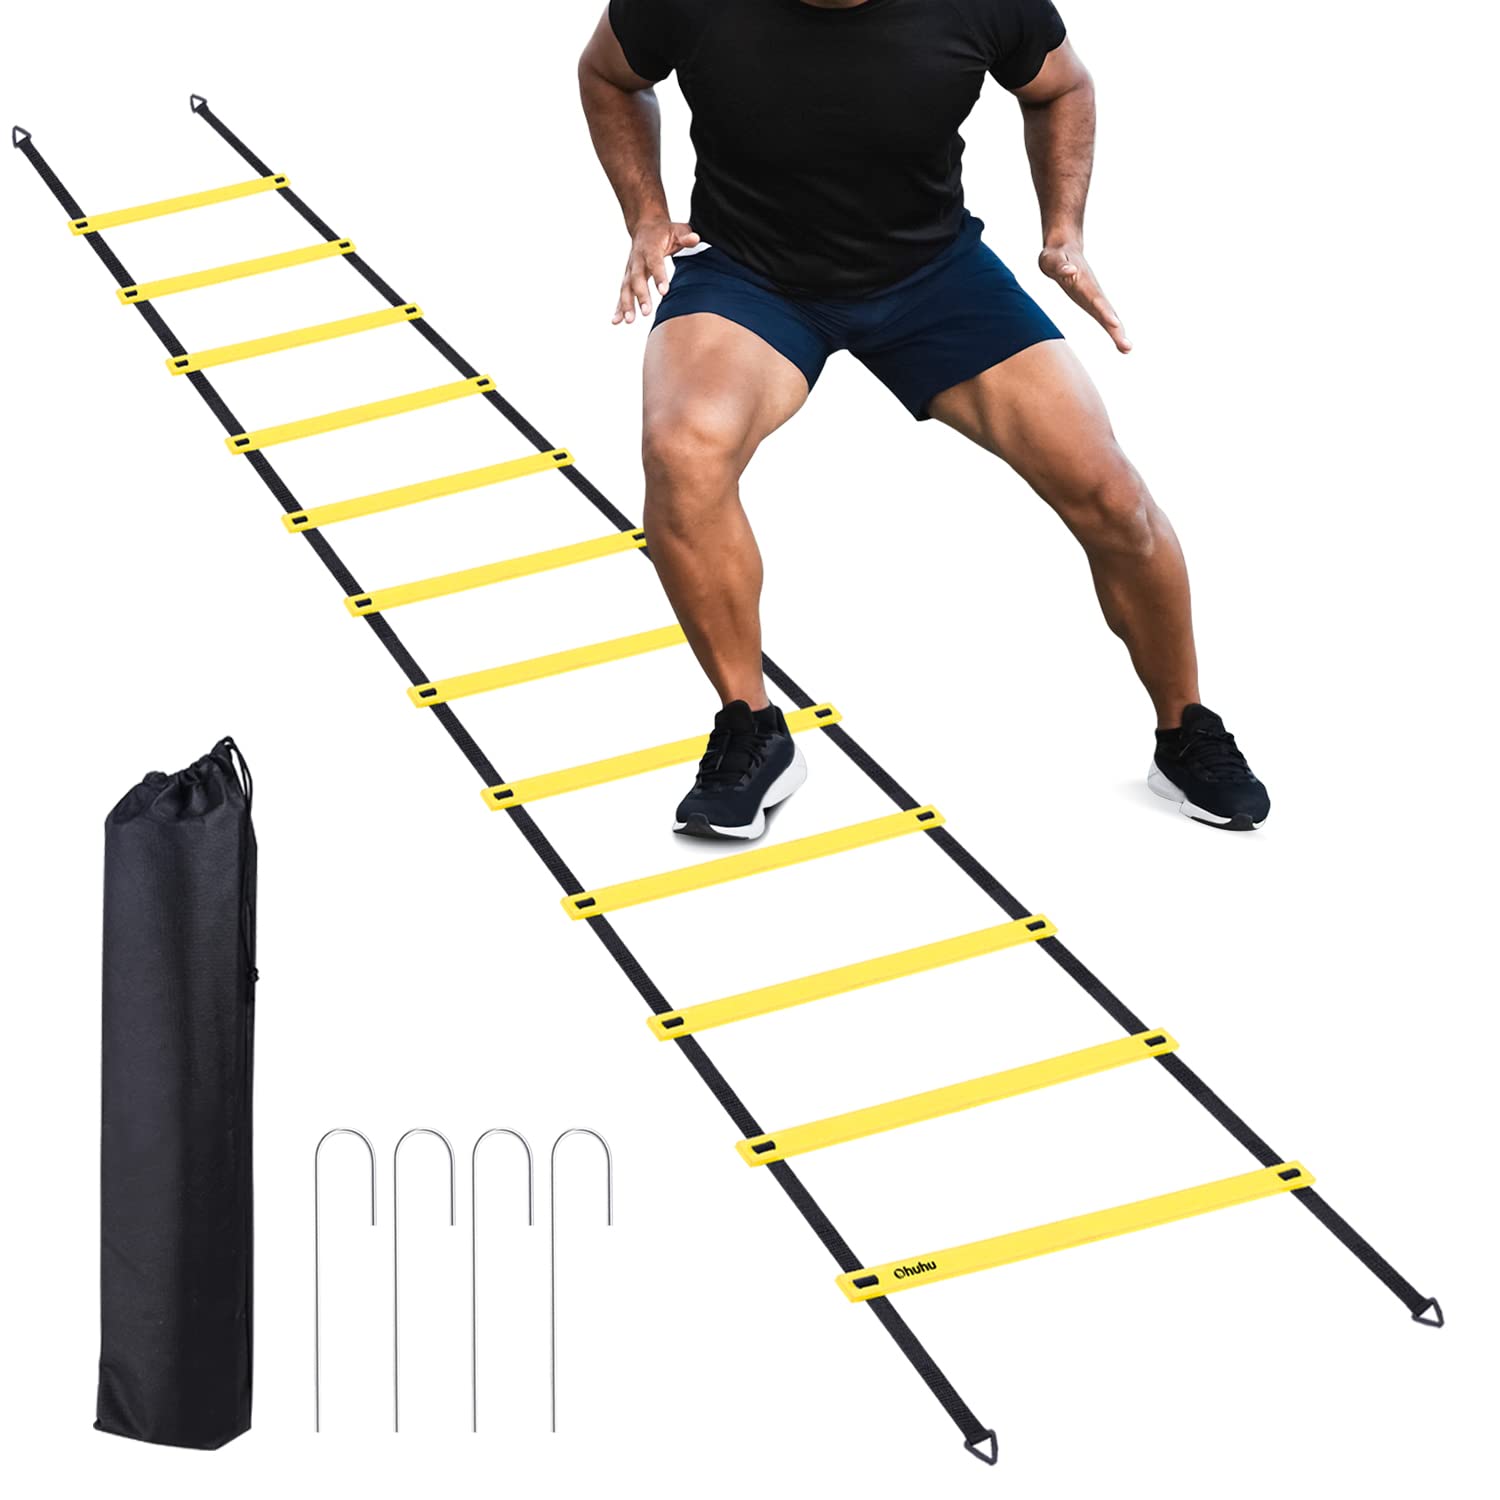 Ohuhu Agility Ladder, Speed Training Exercise Ladders for Soccer Football Boxing Footwork Sports Speed Agility Training with Carry Bag,15ft 12 Rung,Yellow/Blue